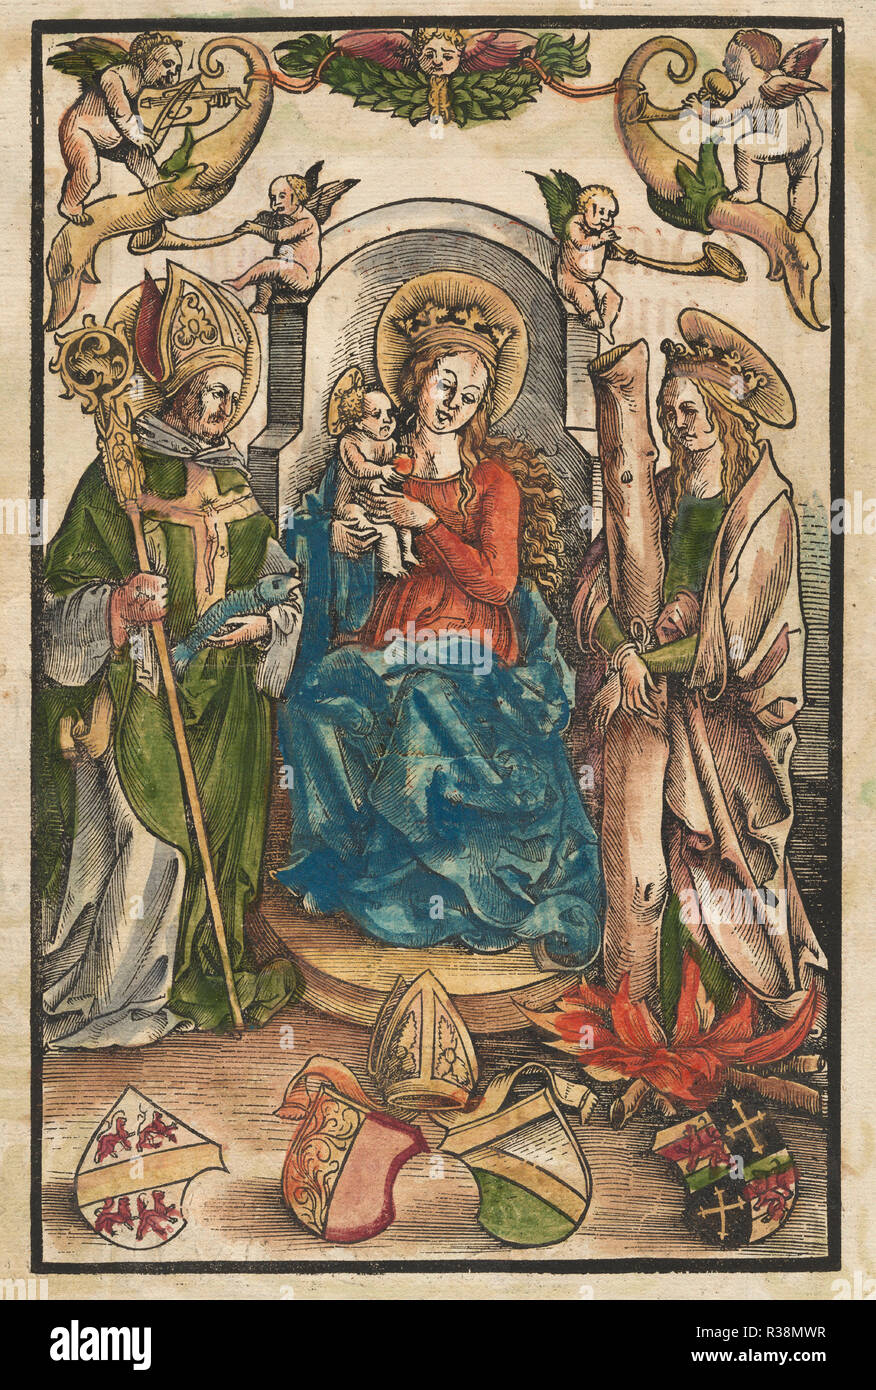 The Madonna with Saint Ulrich and Saint Afra [recto]. Dated: c. 1511. Dimensions: image: 26 x 16.6 cm (10 1/4 x 6 9/16 in.)  sheet: 32.3 x 22 cm (12 11/16 x 8 11/16 in.). Medium: hand-colored woodcut. Museum: National Gallery of Art, Washington DC. Author: Urs Graf I. Stock Photo